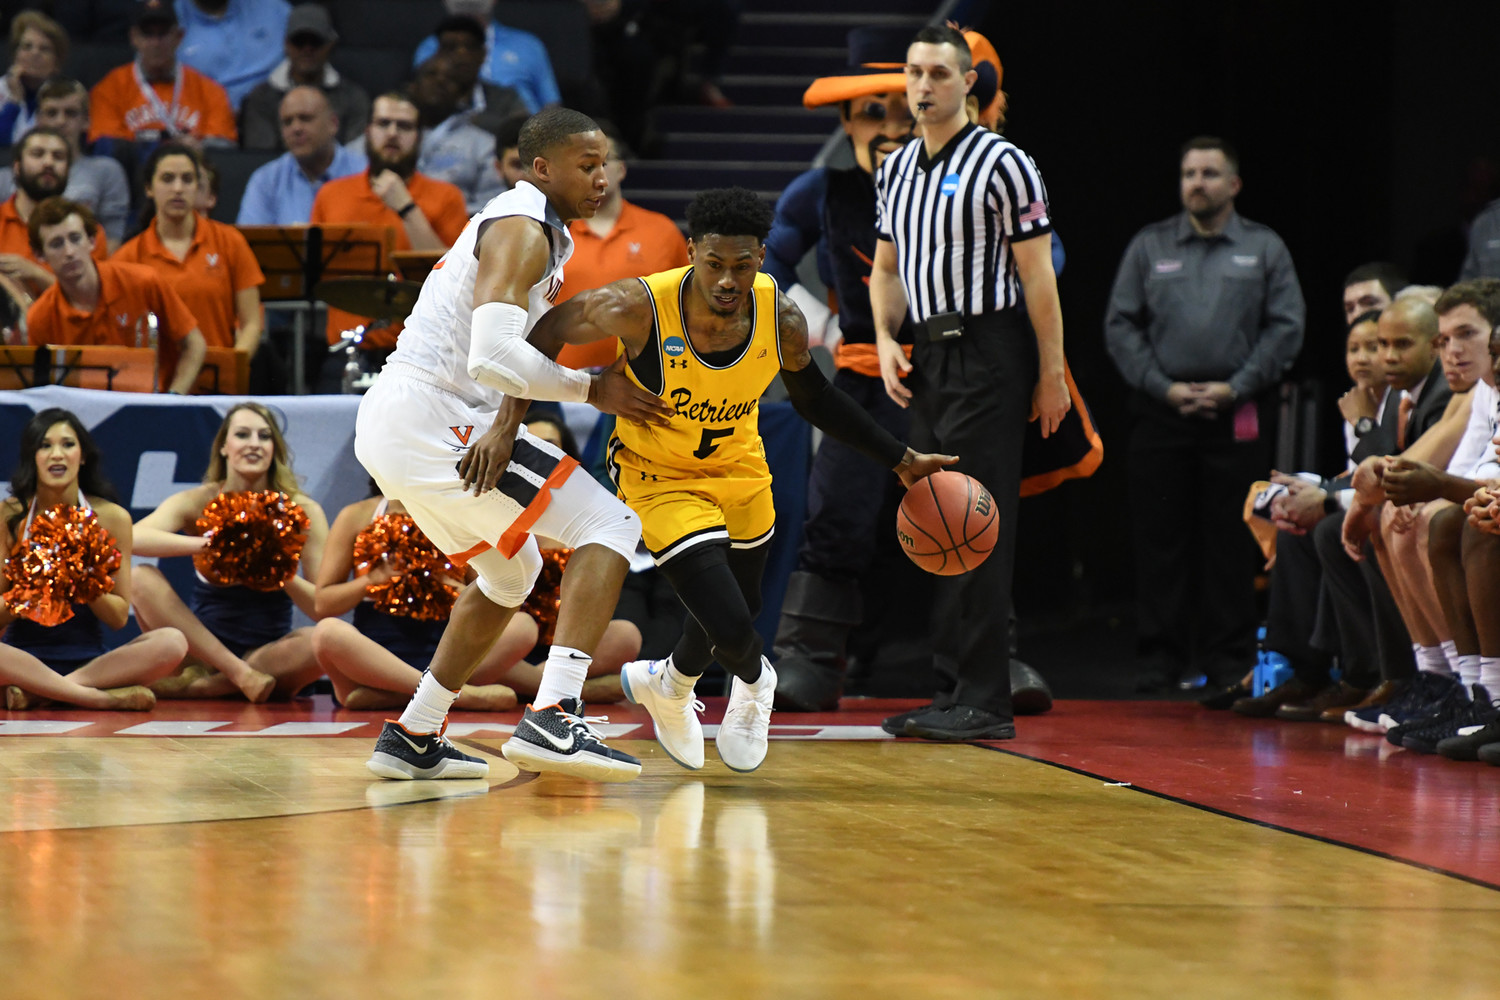 Jourdan Grant of the No. 16 seed UMBC Retrievers dribbles the ball past a player with the No. 1 seed Virginia Cavaliers March 16 in the first round of the 2018 NCAA Tournament in Charlotte, N.C. Grant is a graduate of Archbishop Spalding High School in Severn, Maryland. His team from the University of Maryland, Baltimore County defeated Virginia 74-54. It was the first time in men’s NCAA Tournament history that a No. 16 seed beat a No. 1 seed.